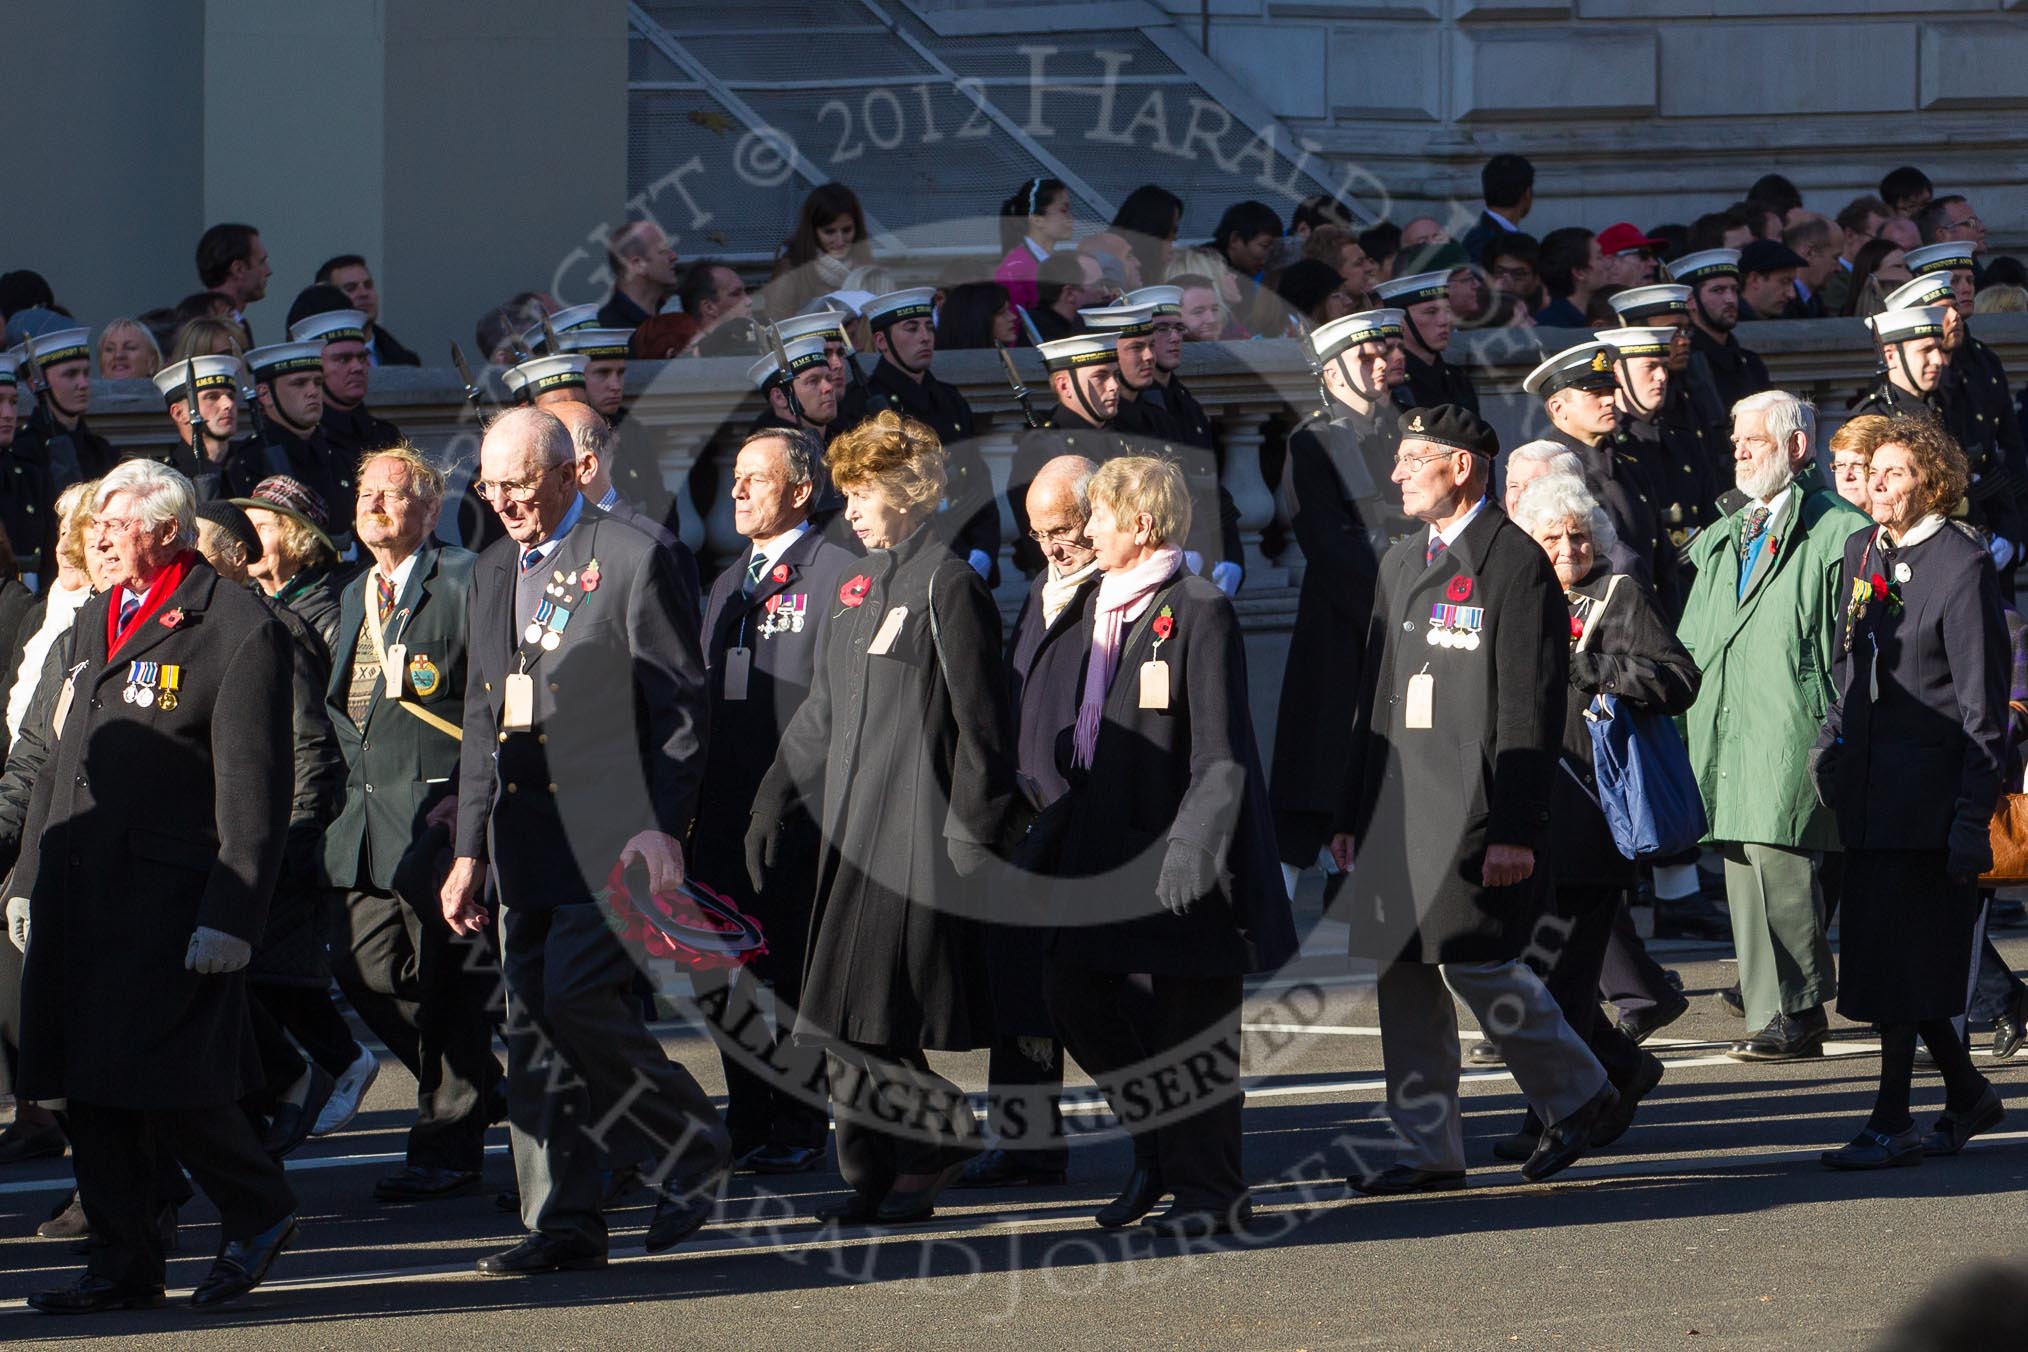 Remembrance Sunday 2012 Cenotaph March Past: Group M6 - Evacuees Reunion Association and M7 - TOC H..
Whitehall, Cenotaph,
London SW1,

United Kingdom,
on 11 November 2012 at 12:10, image #1465